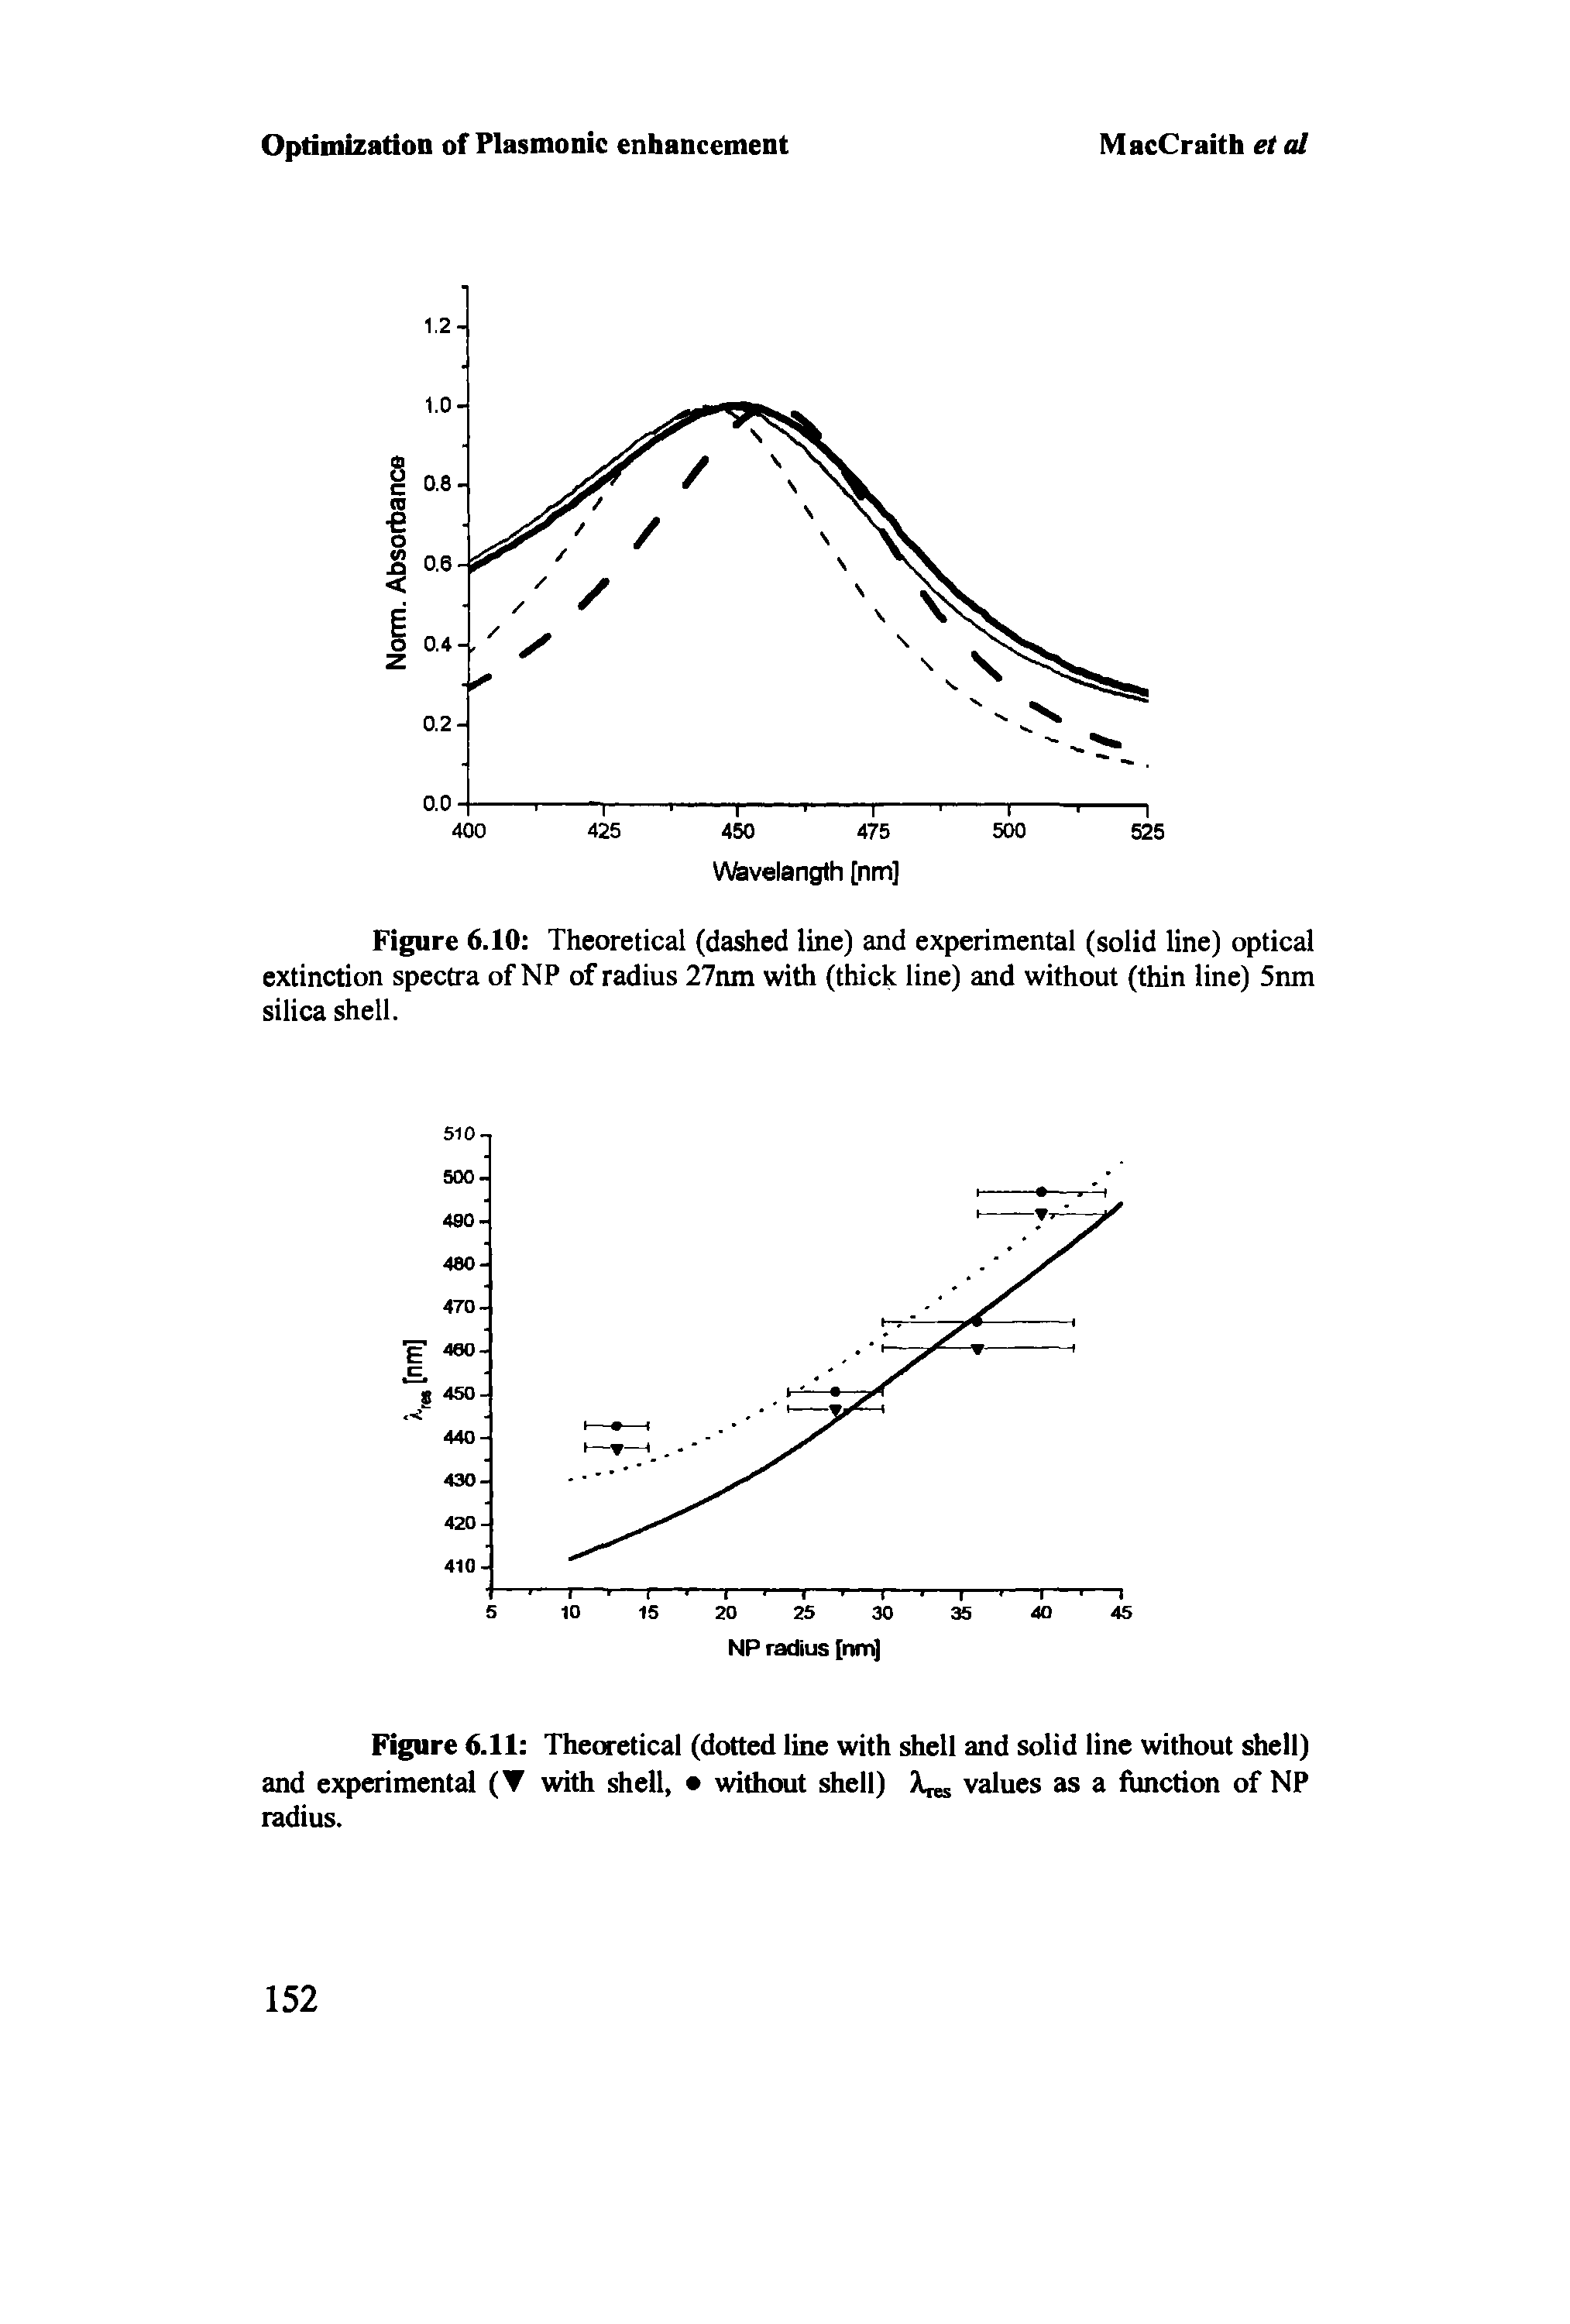 Figure 6.10 Theoretical (dashed line) and experimental (solid line) optical extinction spectra of NP of radius 27nm with (thick line) and without (thin line) 5mn silica shell.